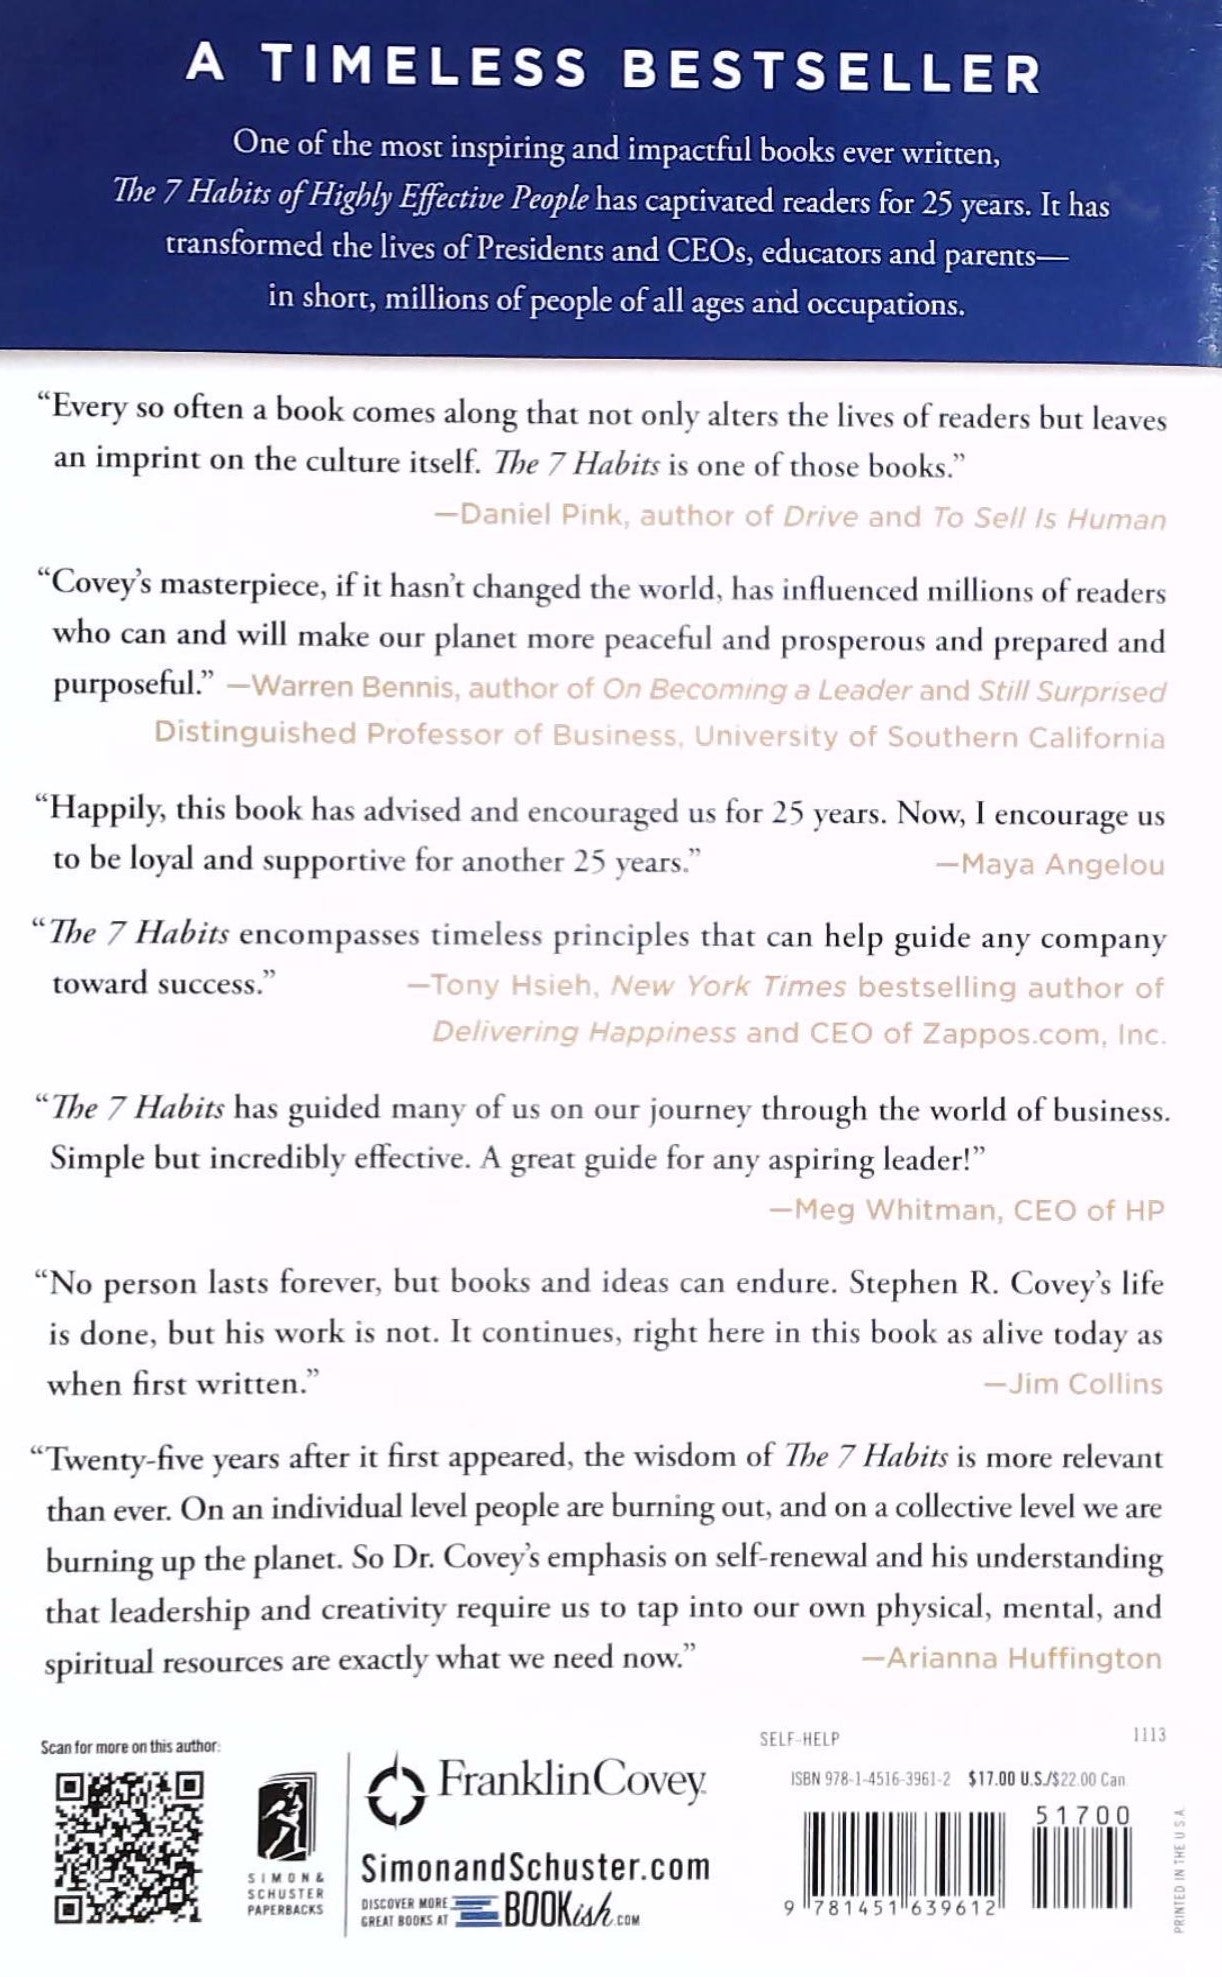 The 7 Habits of Highly Effective People : Powerful Lessons in Personal Change (Stephen R. Covey)